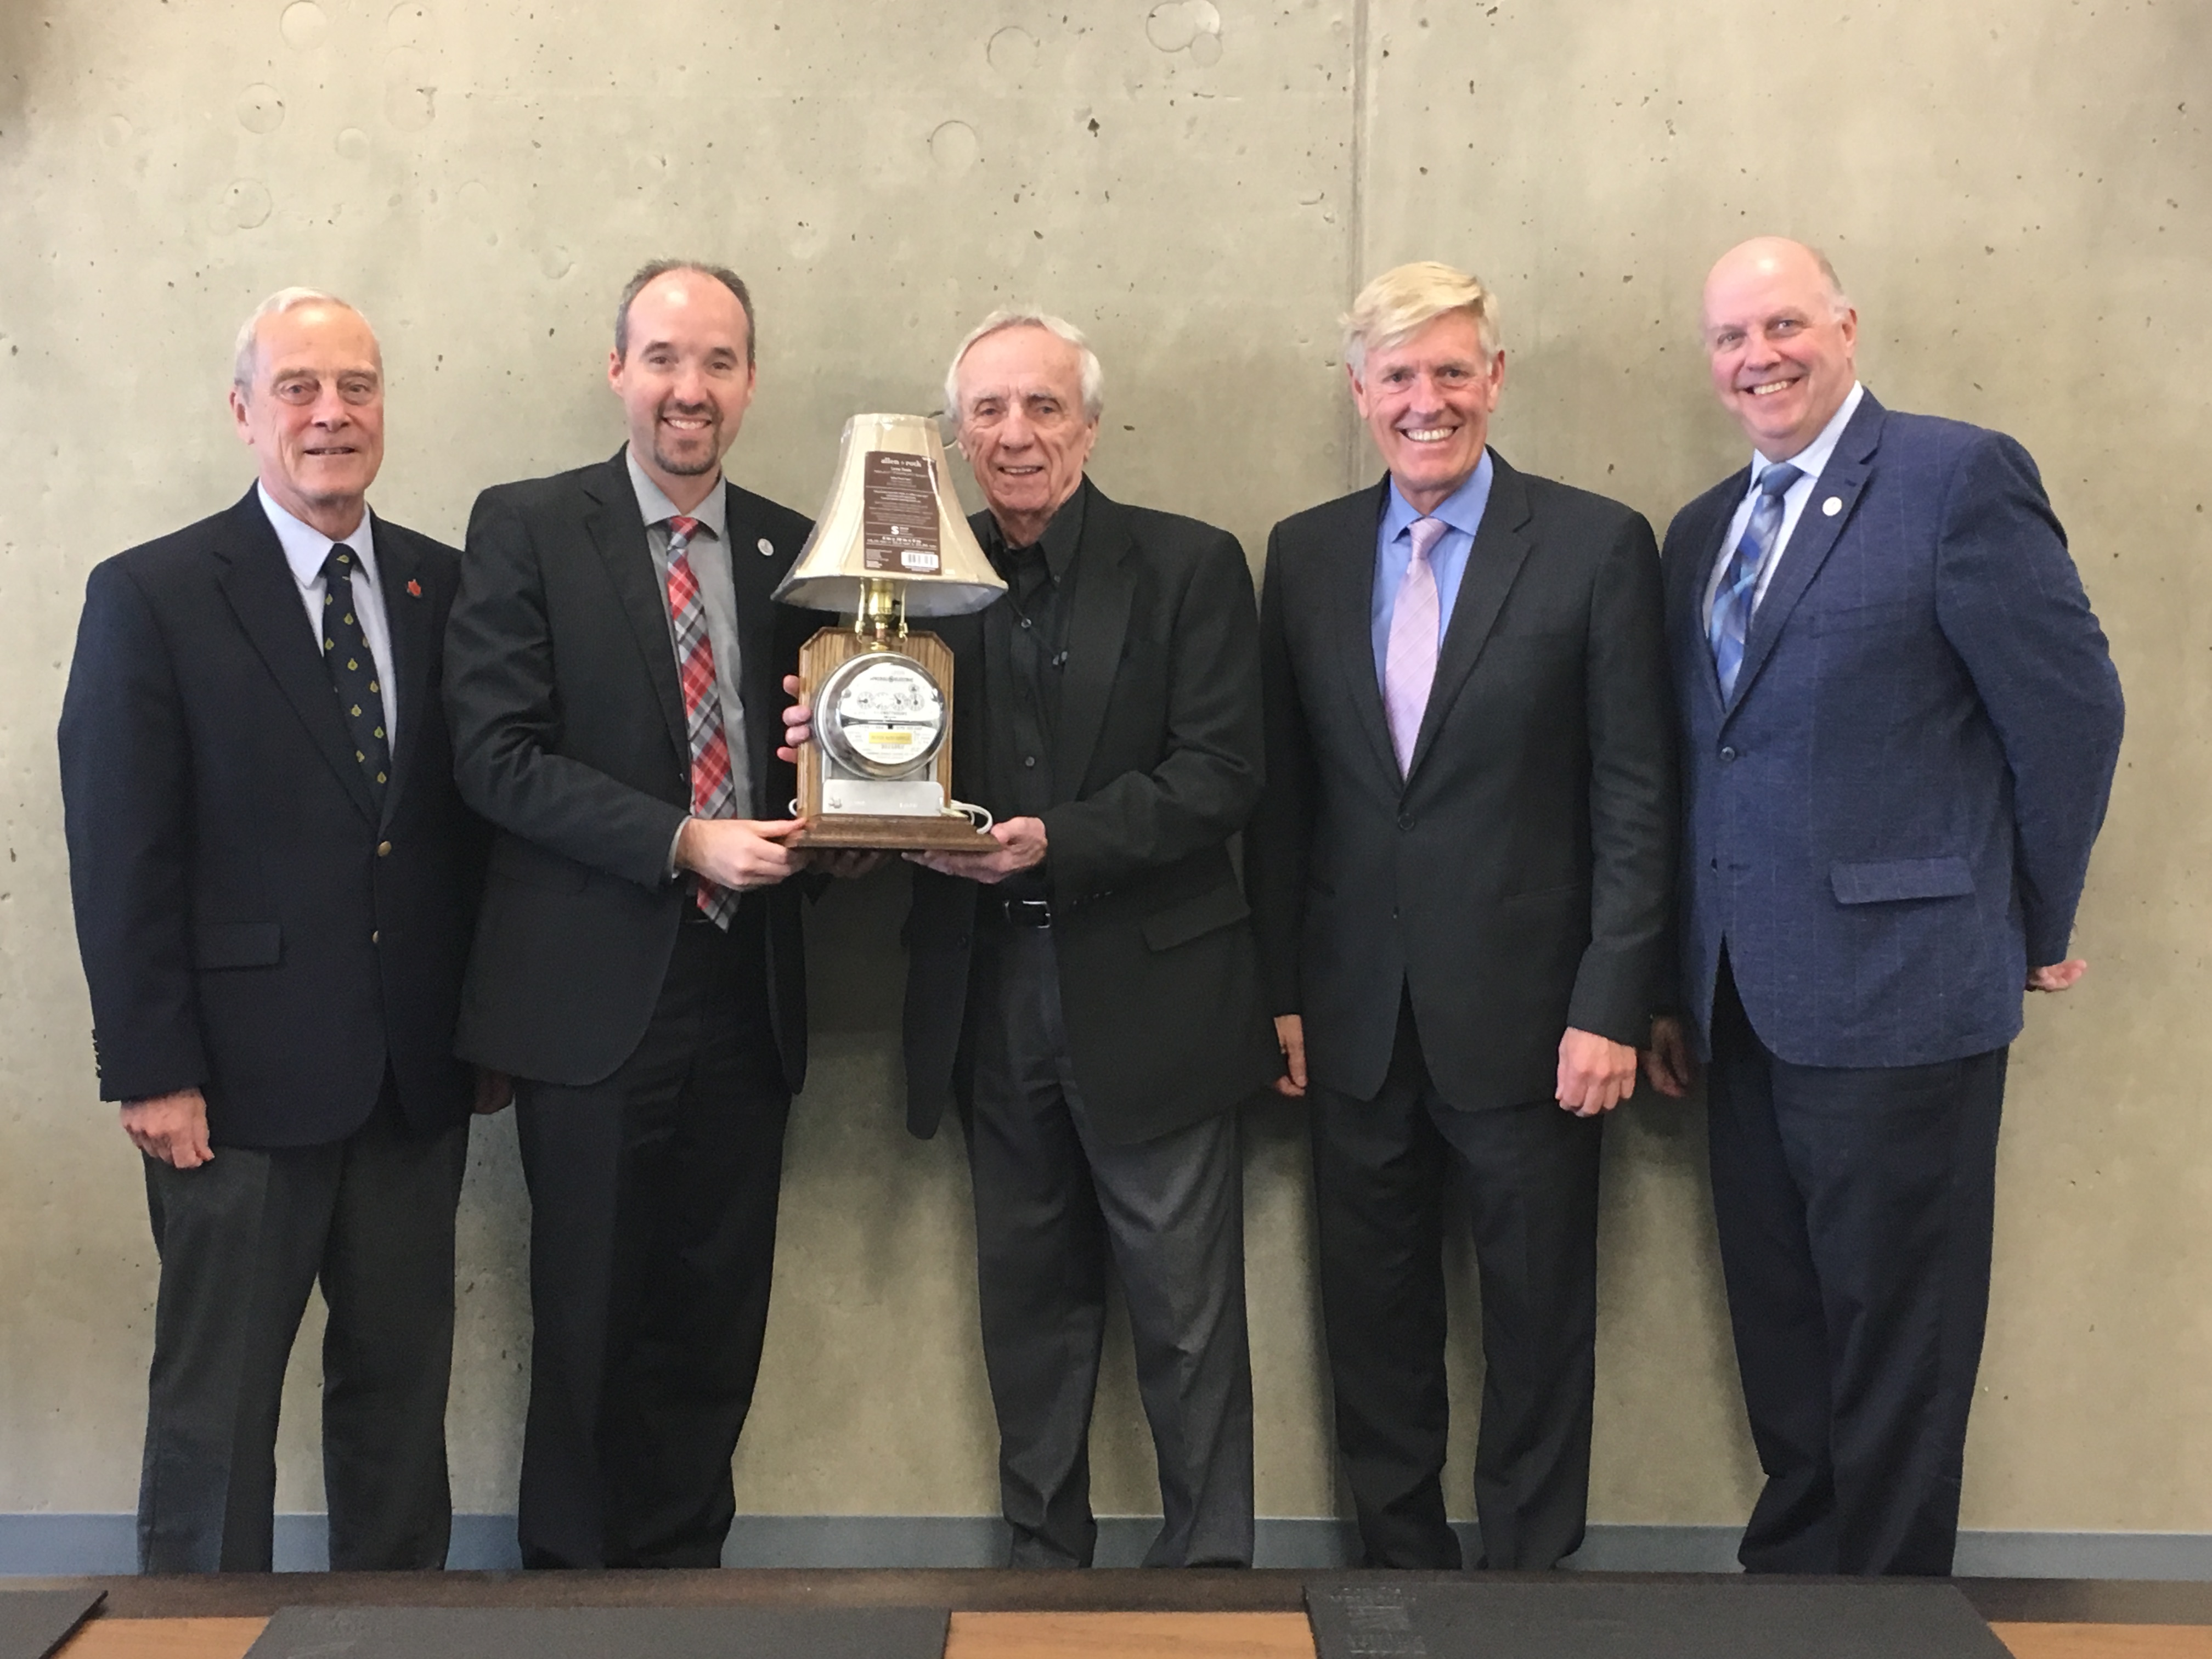 The Kingston Hydro Board of Directors presents Ron Doyle with an award upon his retirement